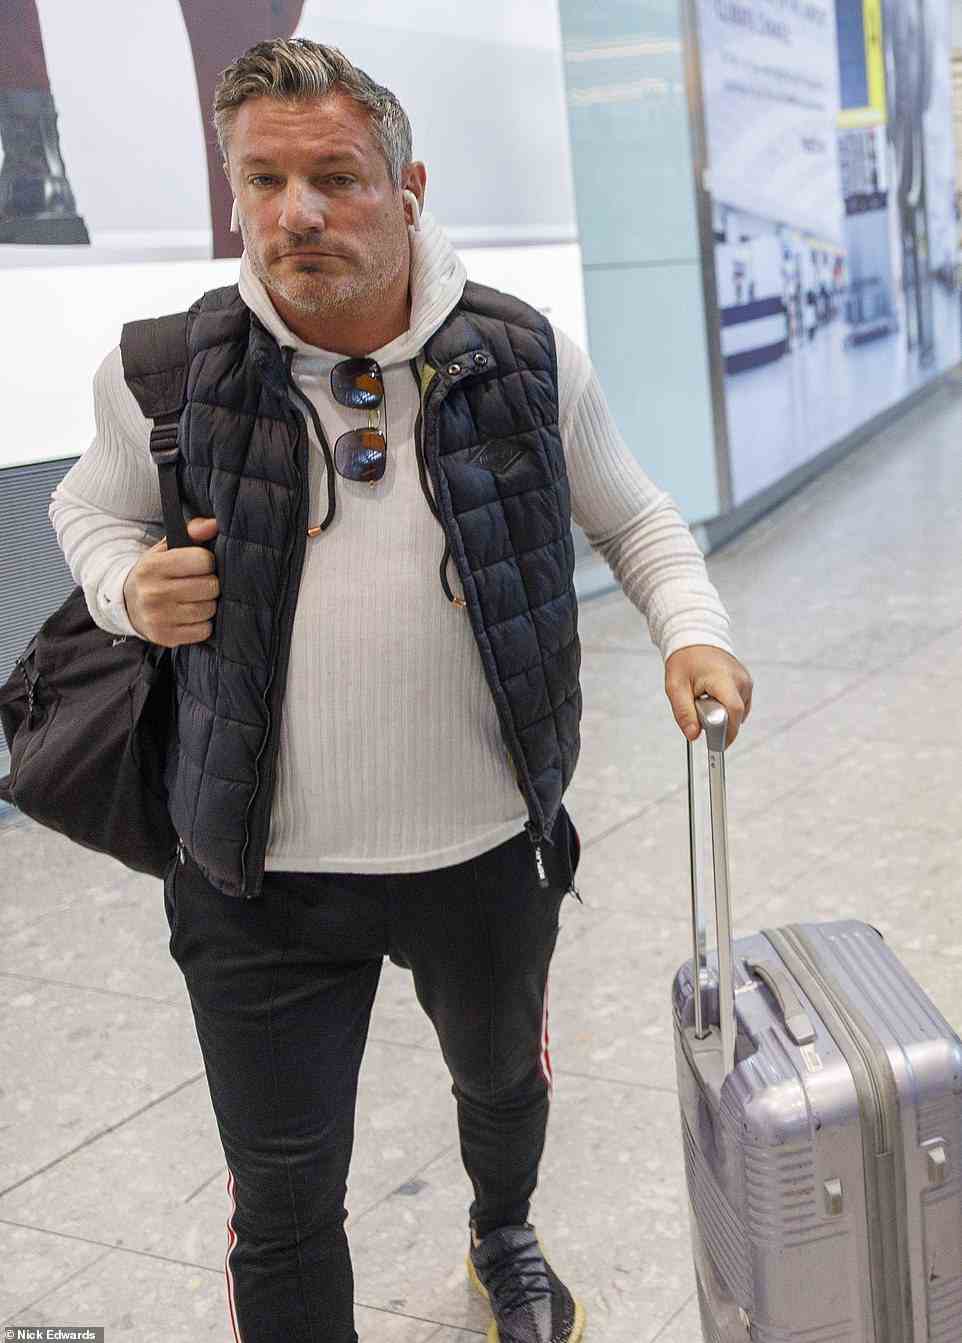 Celebrities: Dean Gaffney was also spotted at Heathrow and wore a gilet and white top